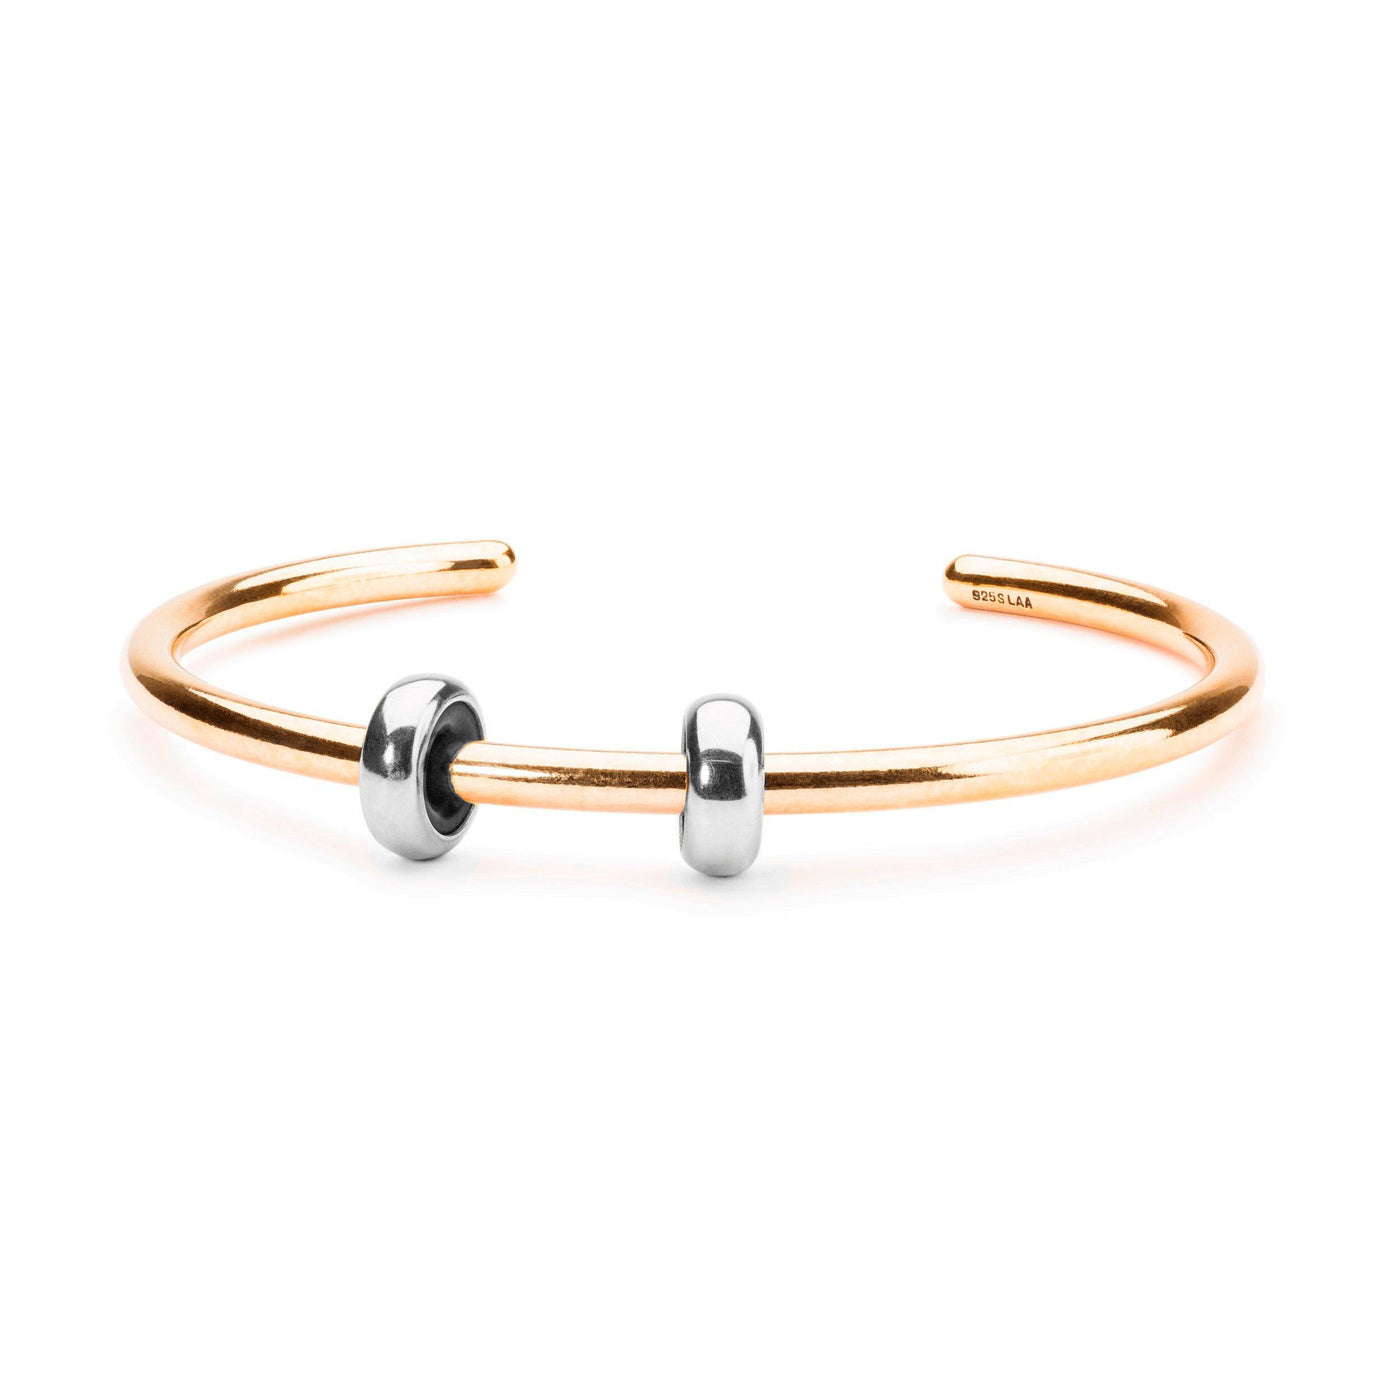 Gold Plated Bangle with 2 x Silver Spacers - Trollbeads Canada